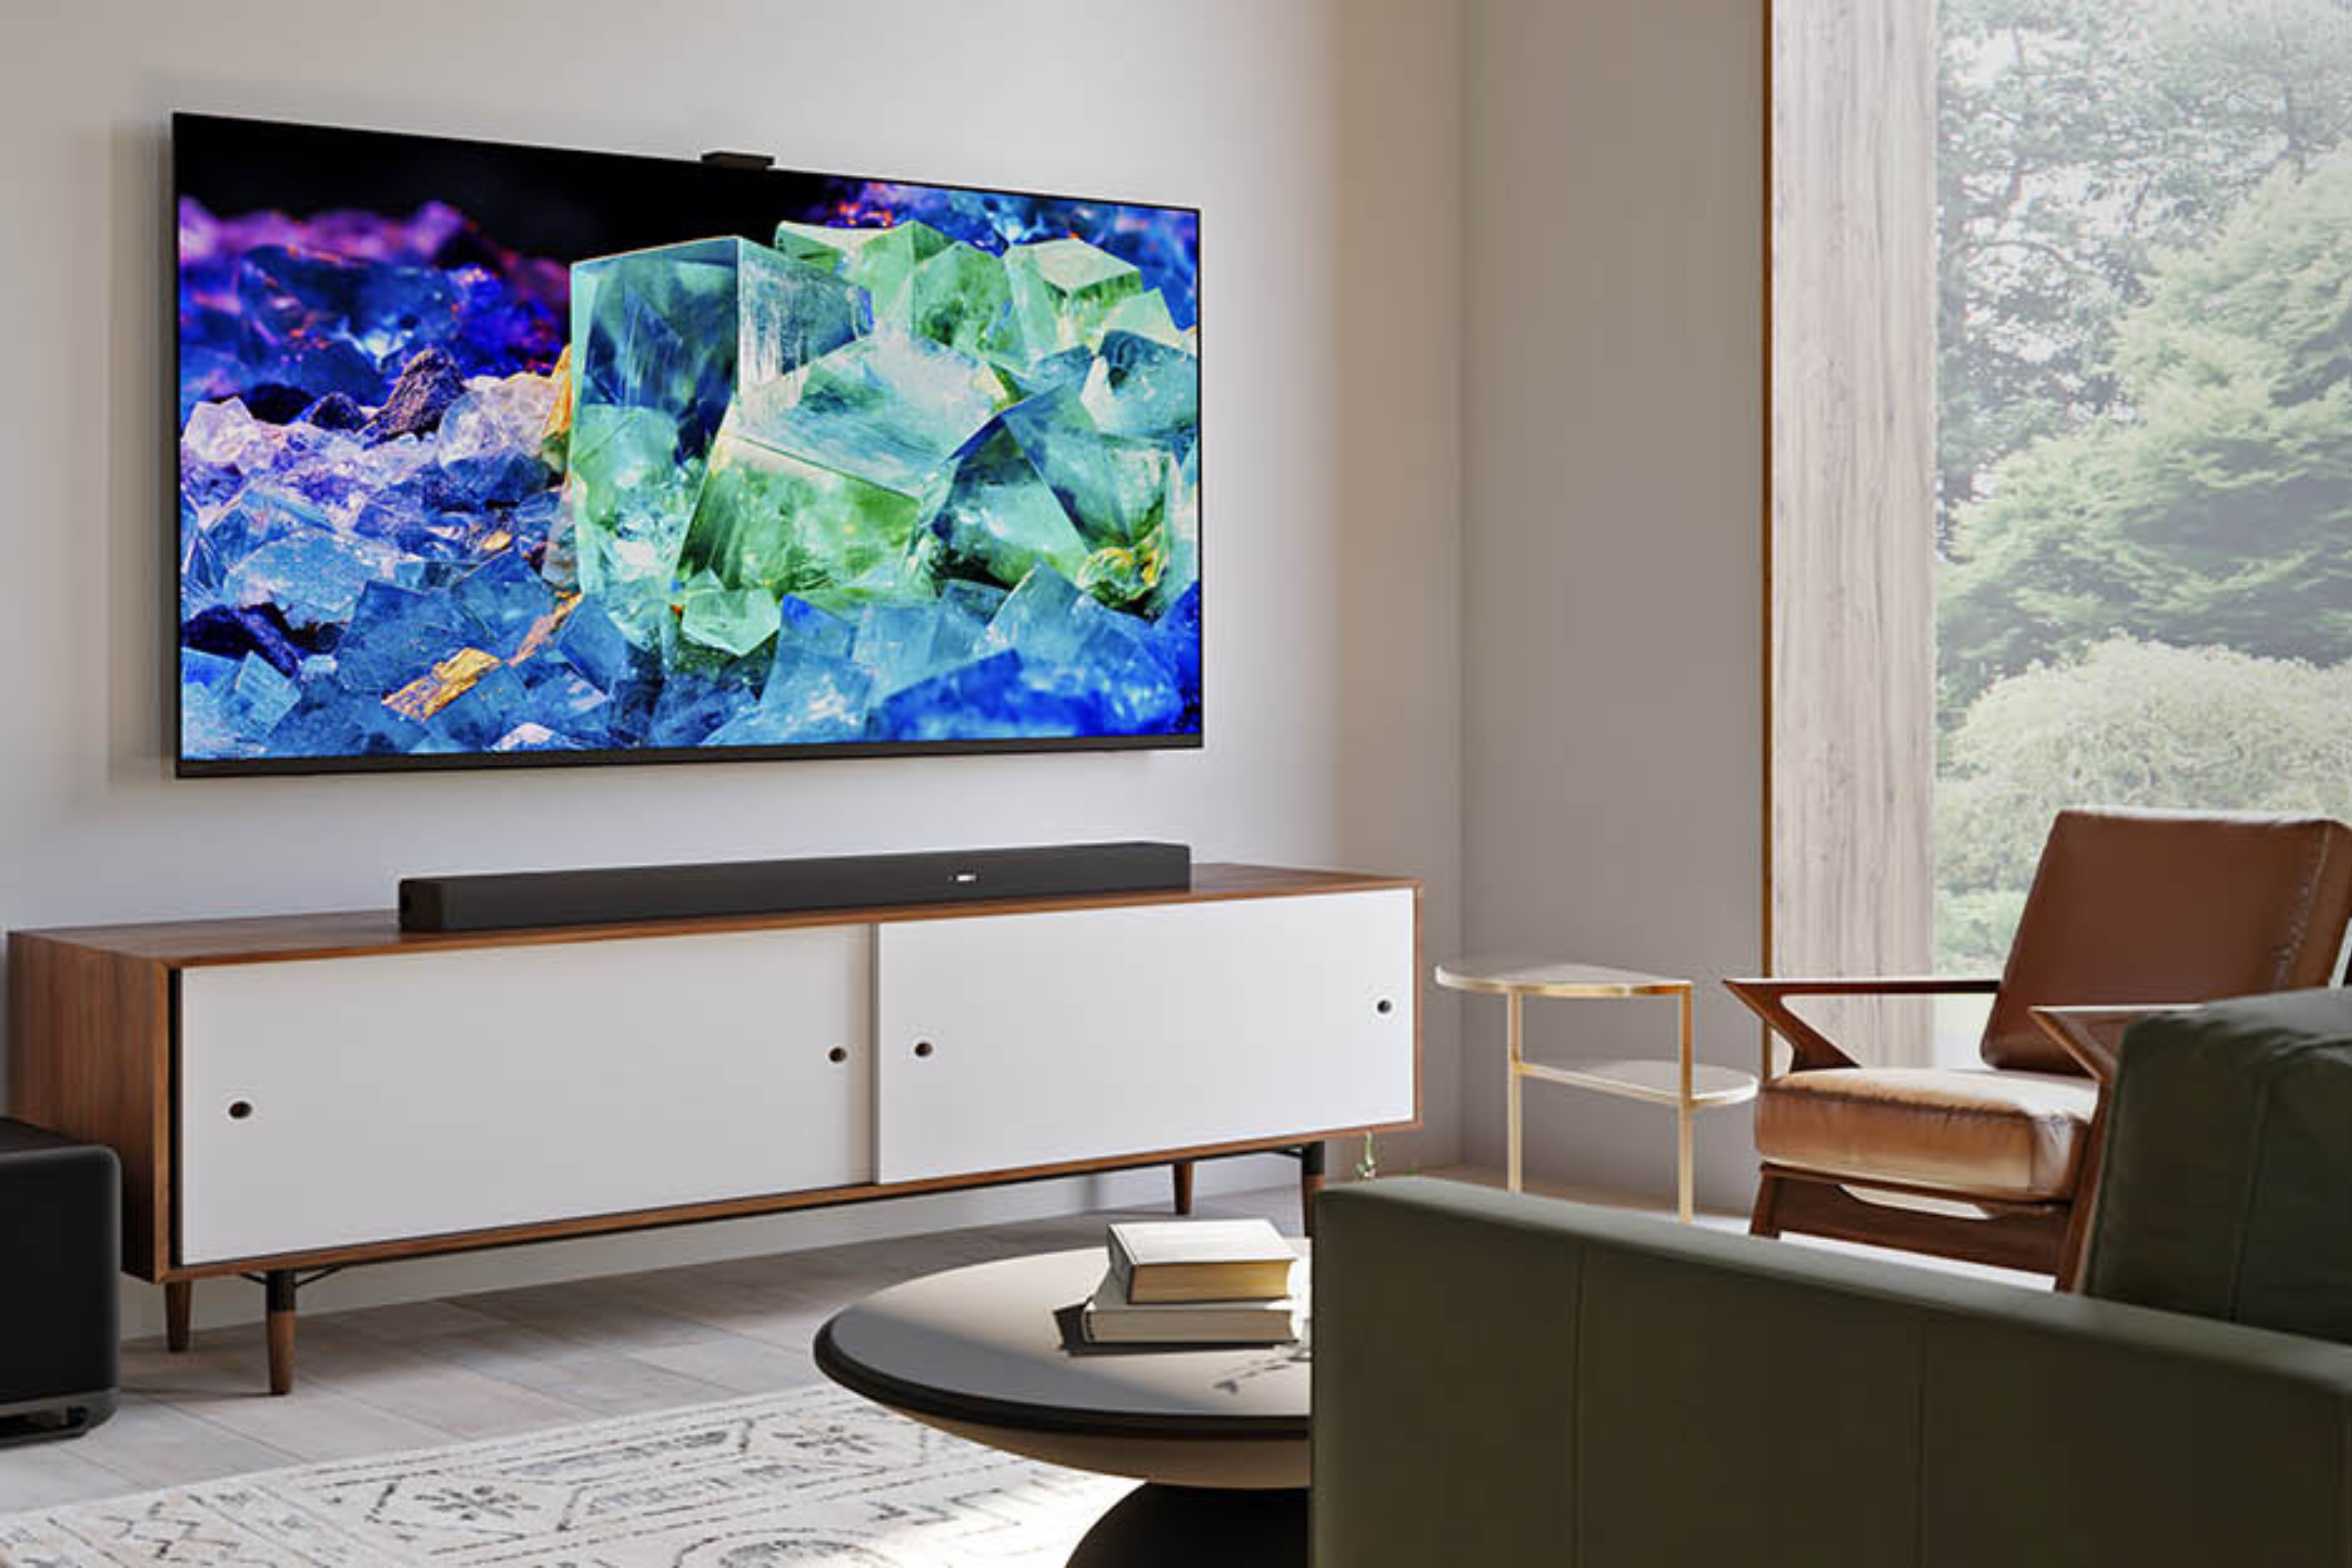 Sony OLED 55 inch BRAVIA XR A80K Series 4K Ultra HD TV in the living room